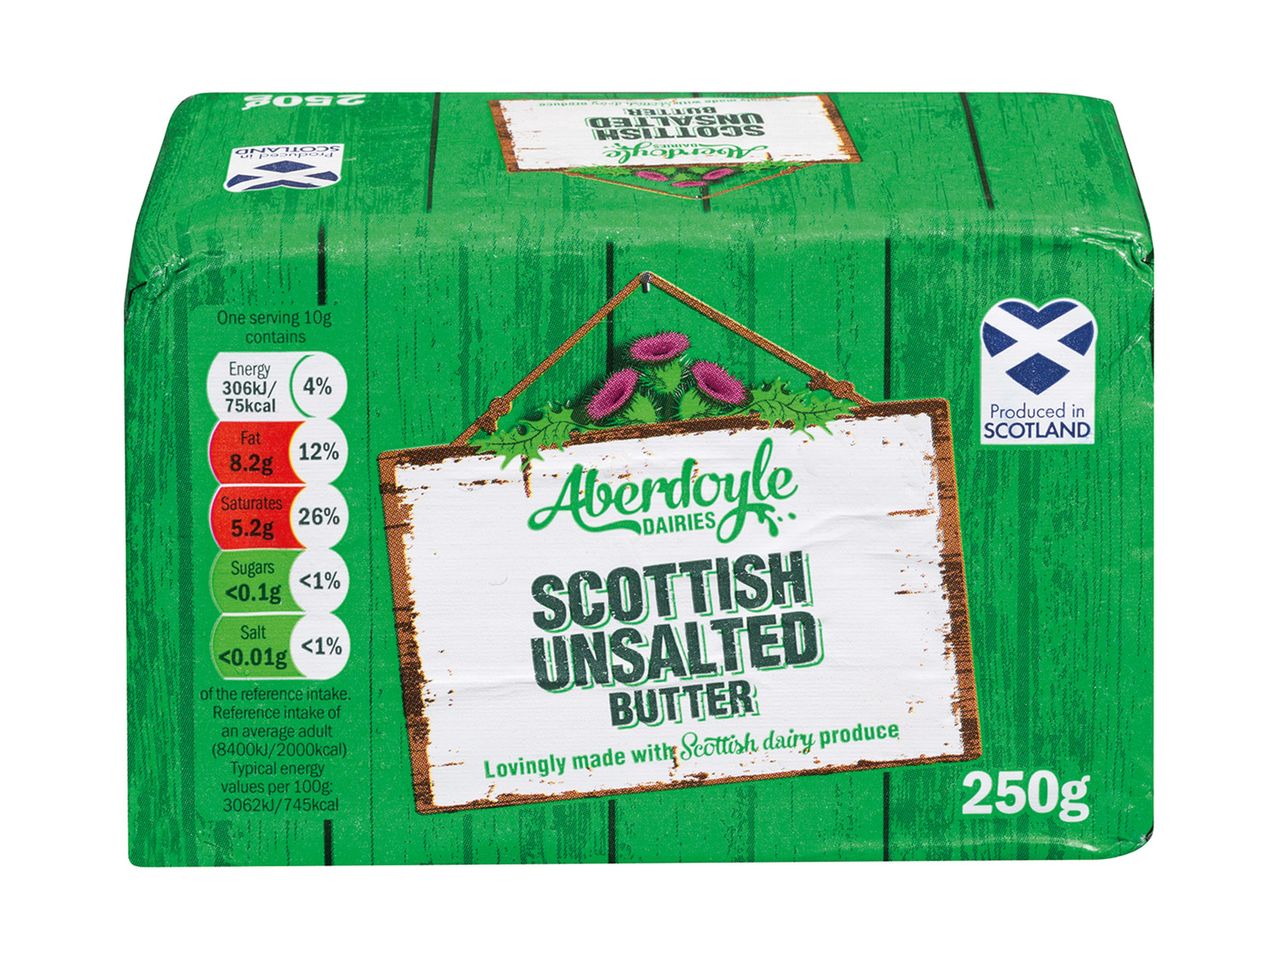 Go to full screen view: Aberdoyle Dairies Scottish Unsalted Butter - Image 1